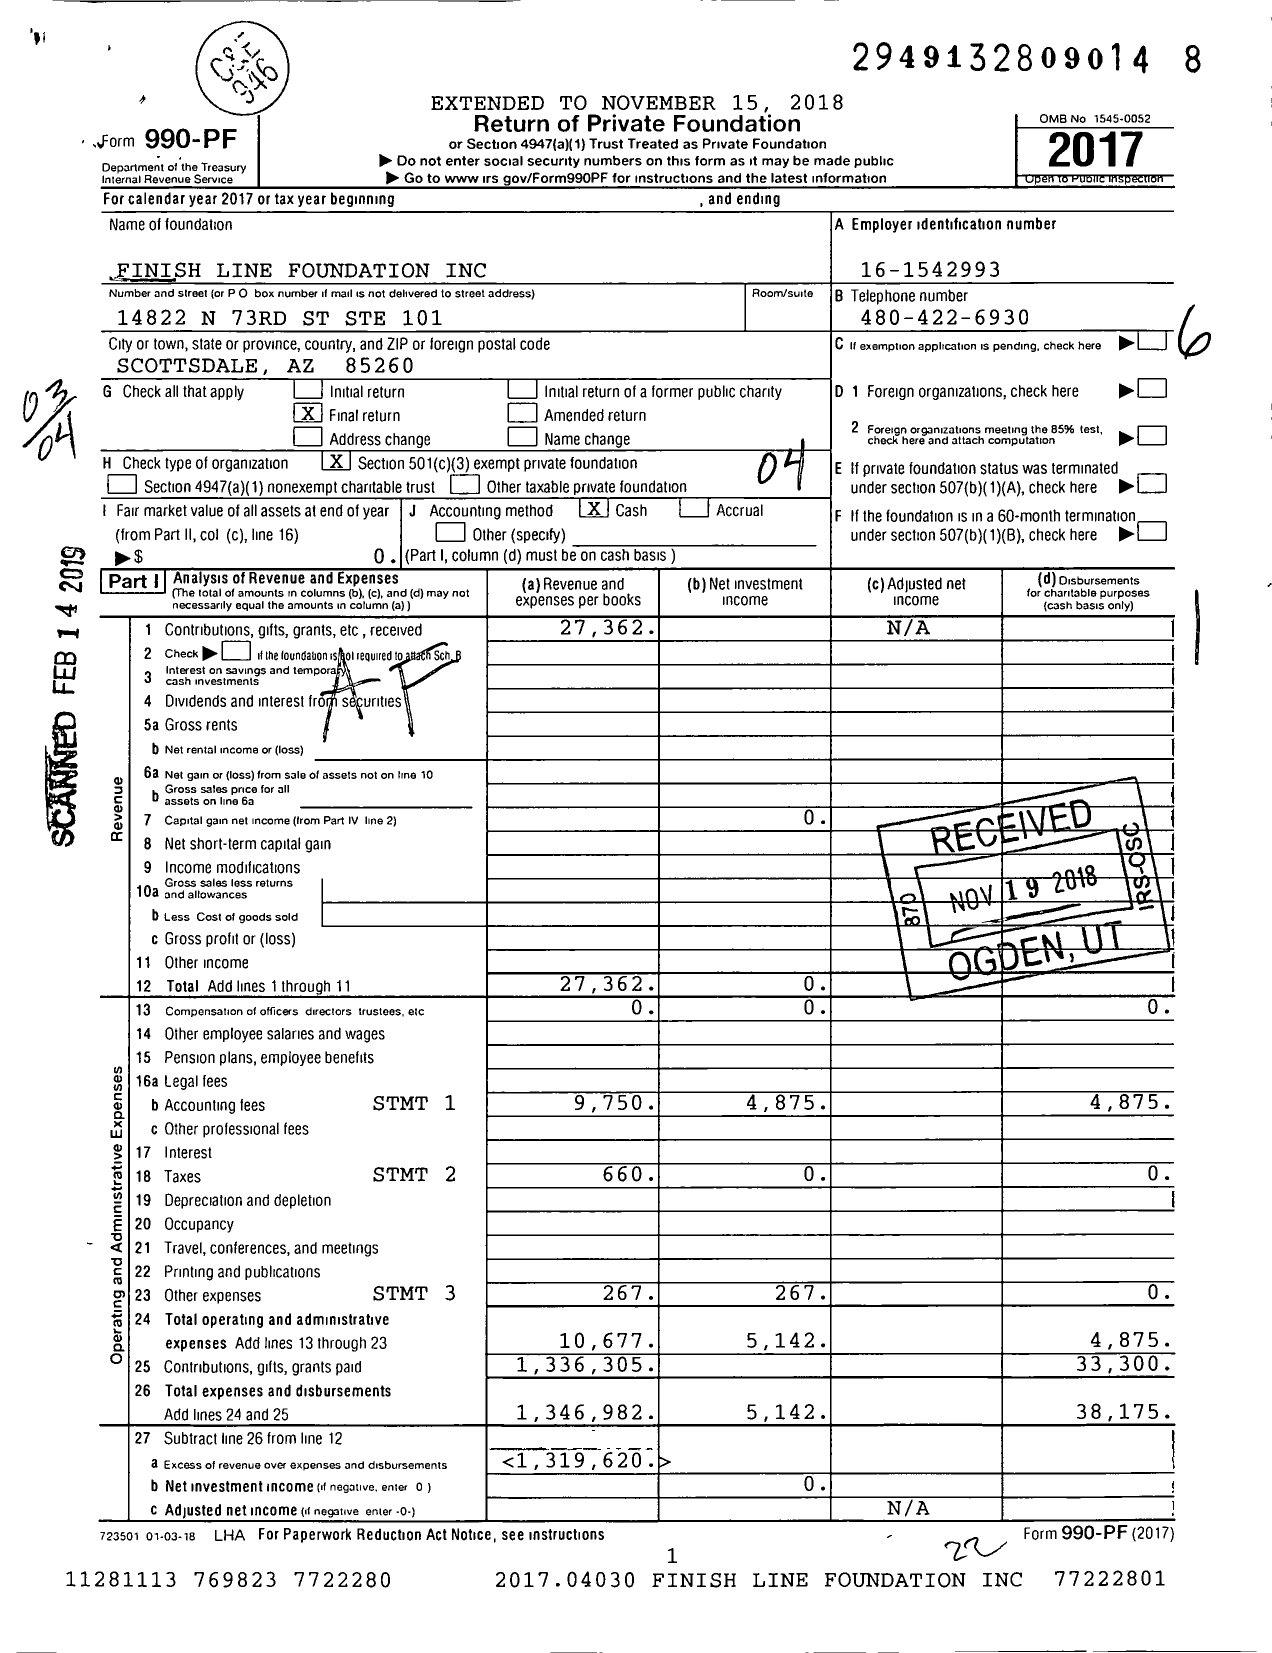 Image of first page of 2017 Form 990PF for Finish Line Foundation